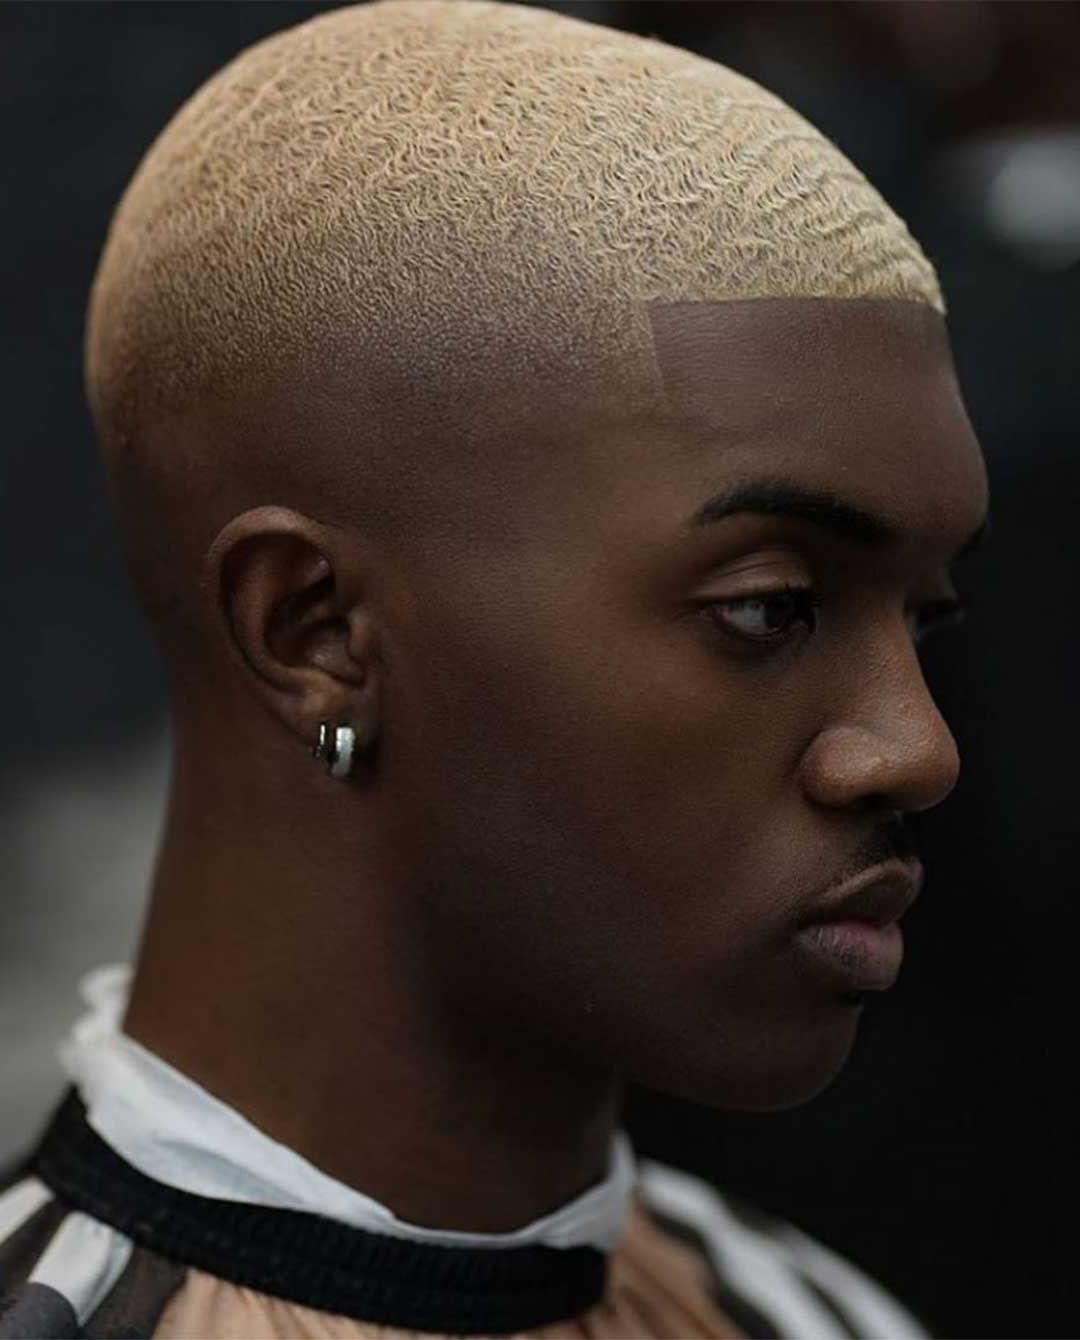 24+ Best Waves Haircuts For Black Men In 2022 – Men's Hairstyle Tips Intended For Well Known Waves Haircuts With Blonde Ombre (View 9 of 20)